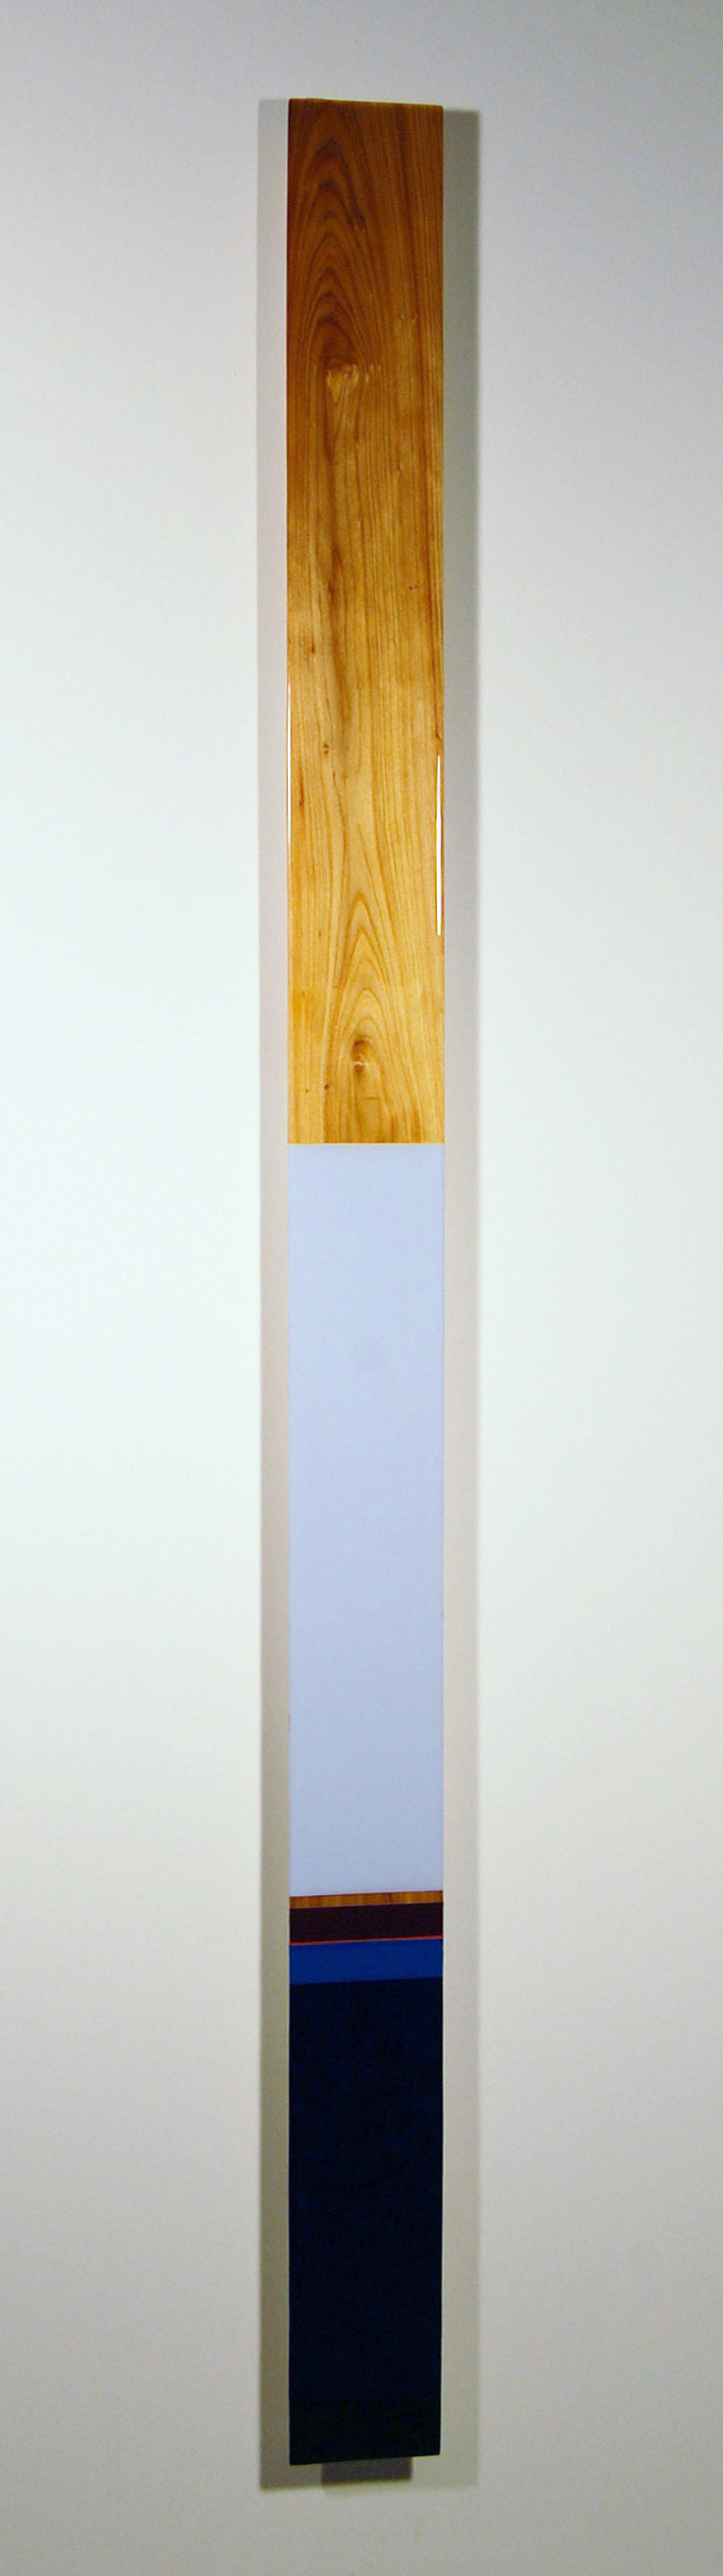   Leaner L3  - Acrylic, Cypress, select pine, and UV resin - Dimension: 76” x 5.5” x 2” / 193 x 14 x 6 cm 